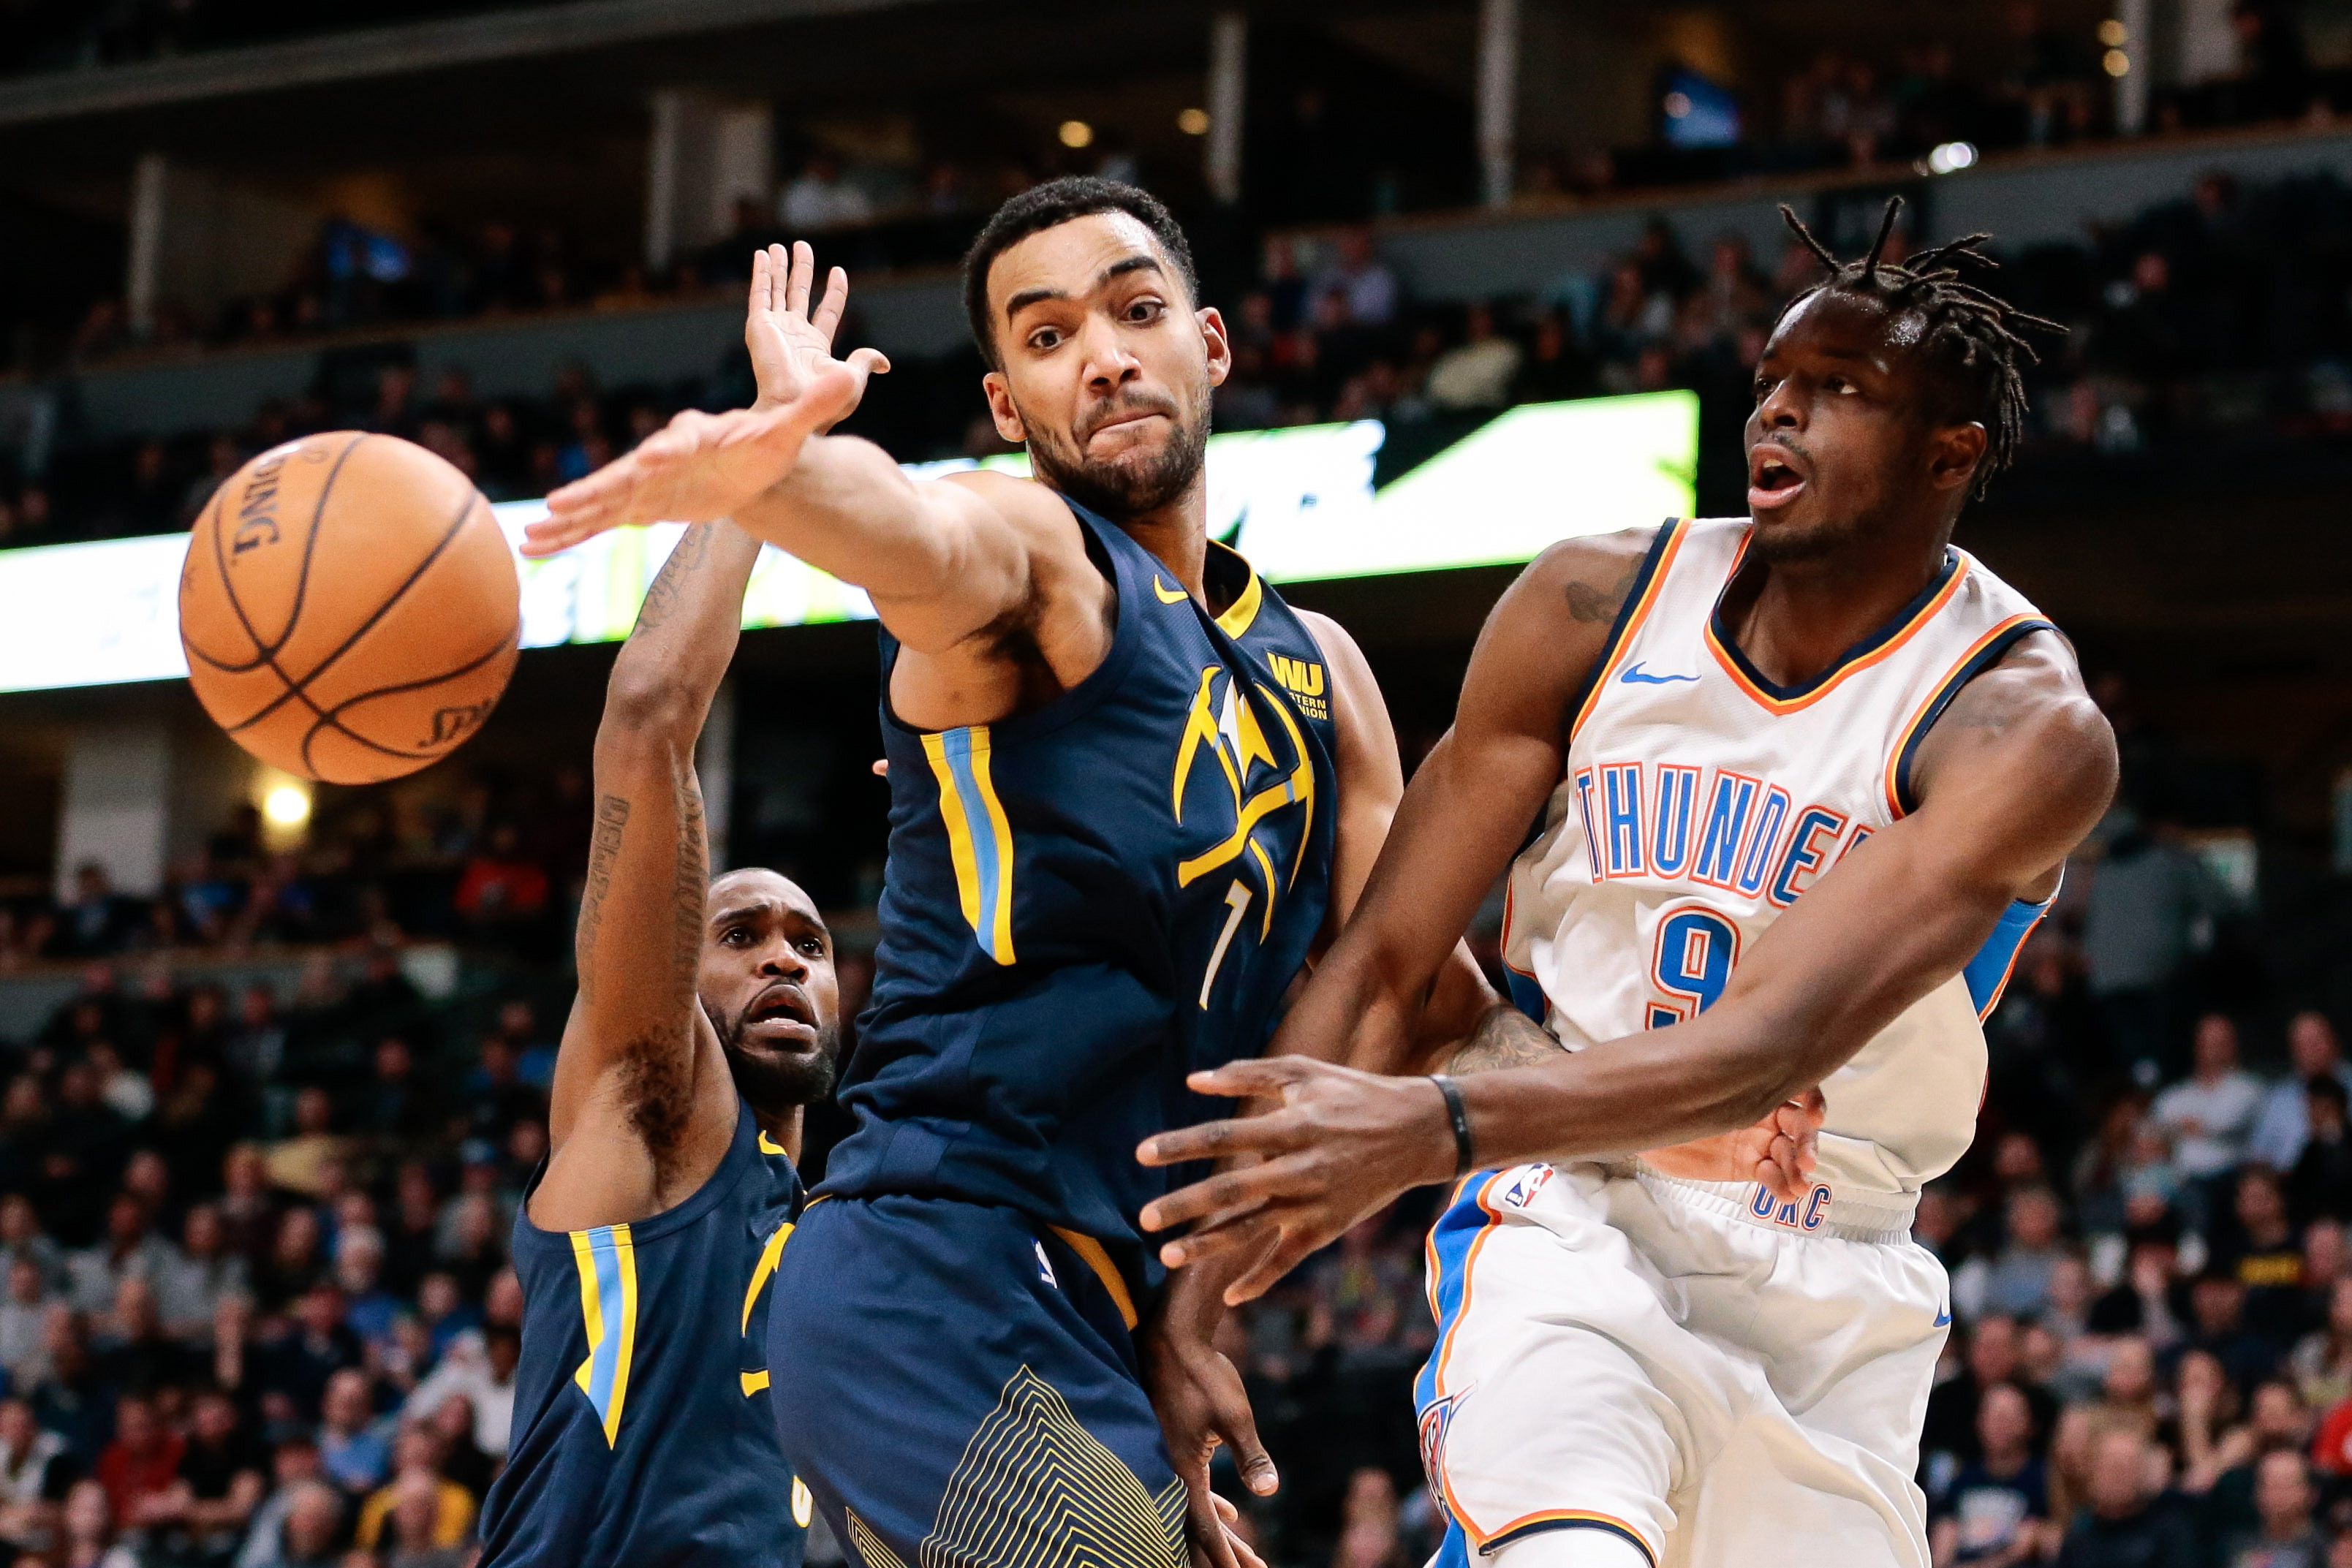 Denver Nuggets forward Trey Lyles (7) and guard Will Barton (5) defend against Oklahoma City Thunder forward Jerami Grant (9) in the fourth quarter at the Pepsi Center.